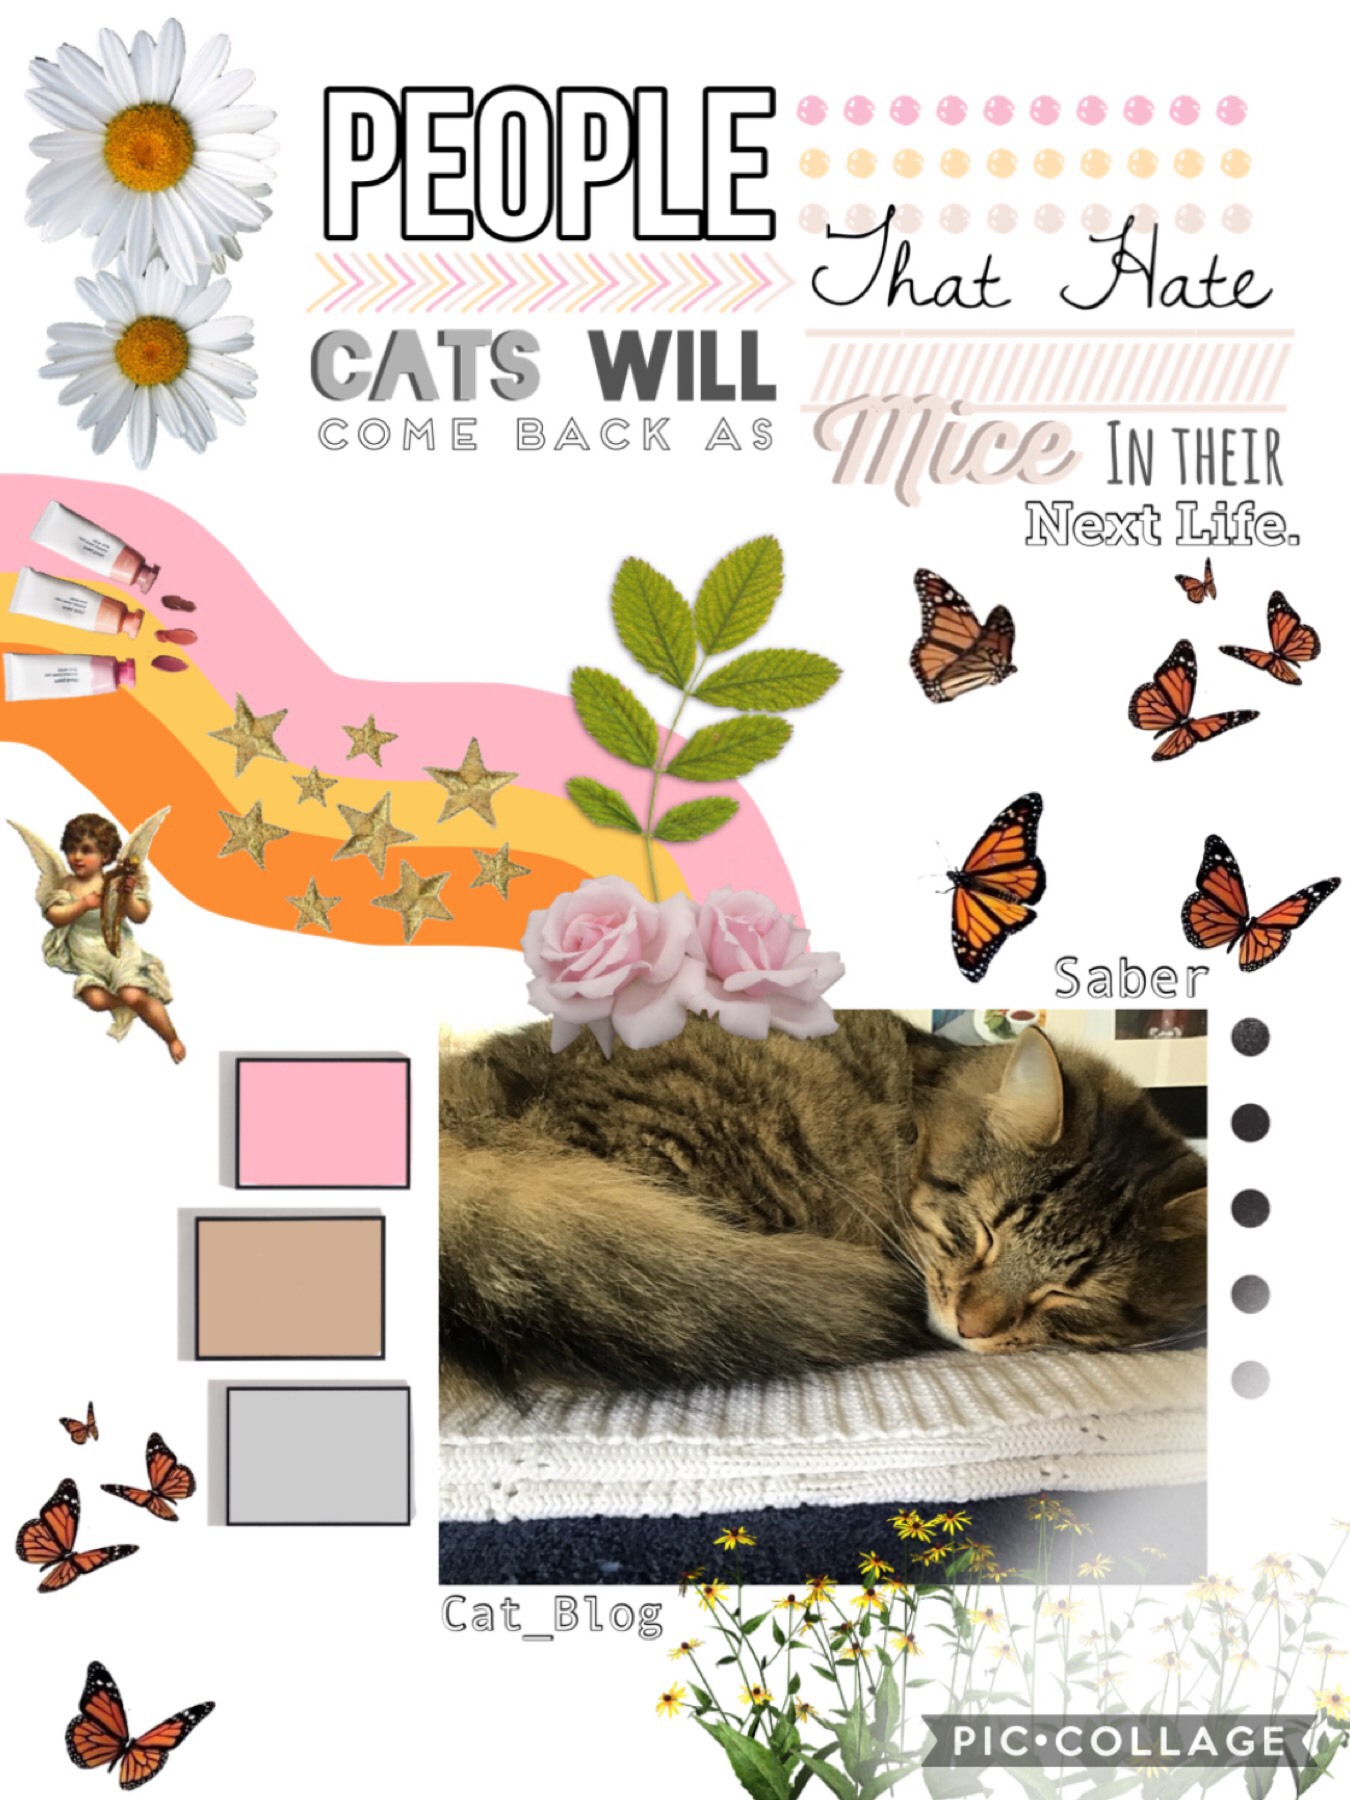 😺TAP😺

Haha, so this collage is all OVER THE PLACE!!! I absolutely 💖 the text!! What do you guys think about this collage?